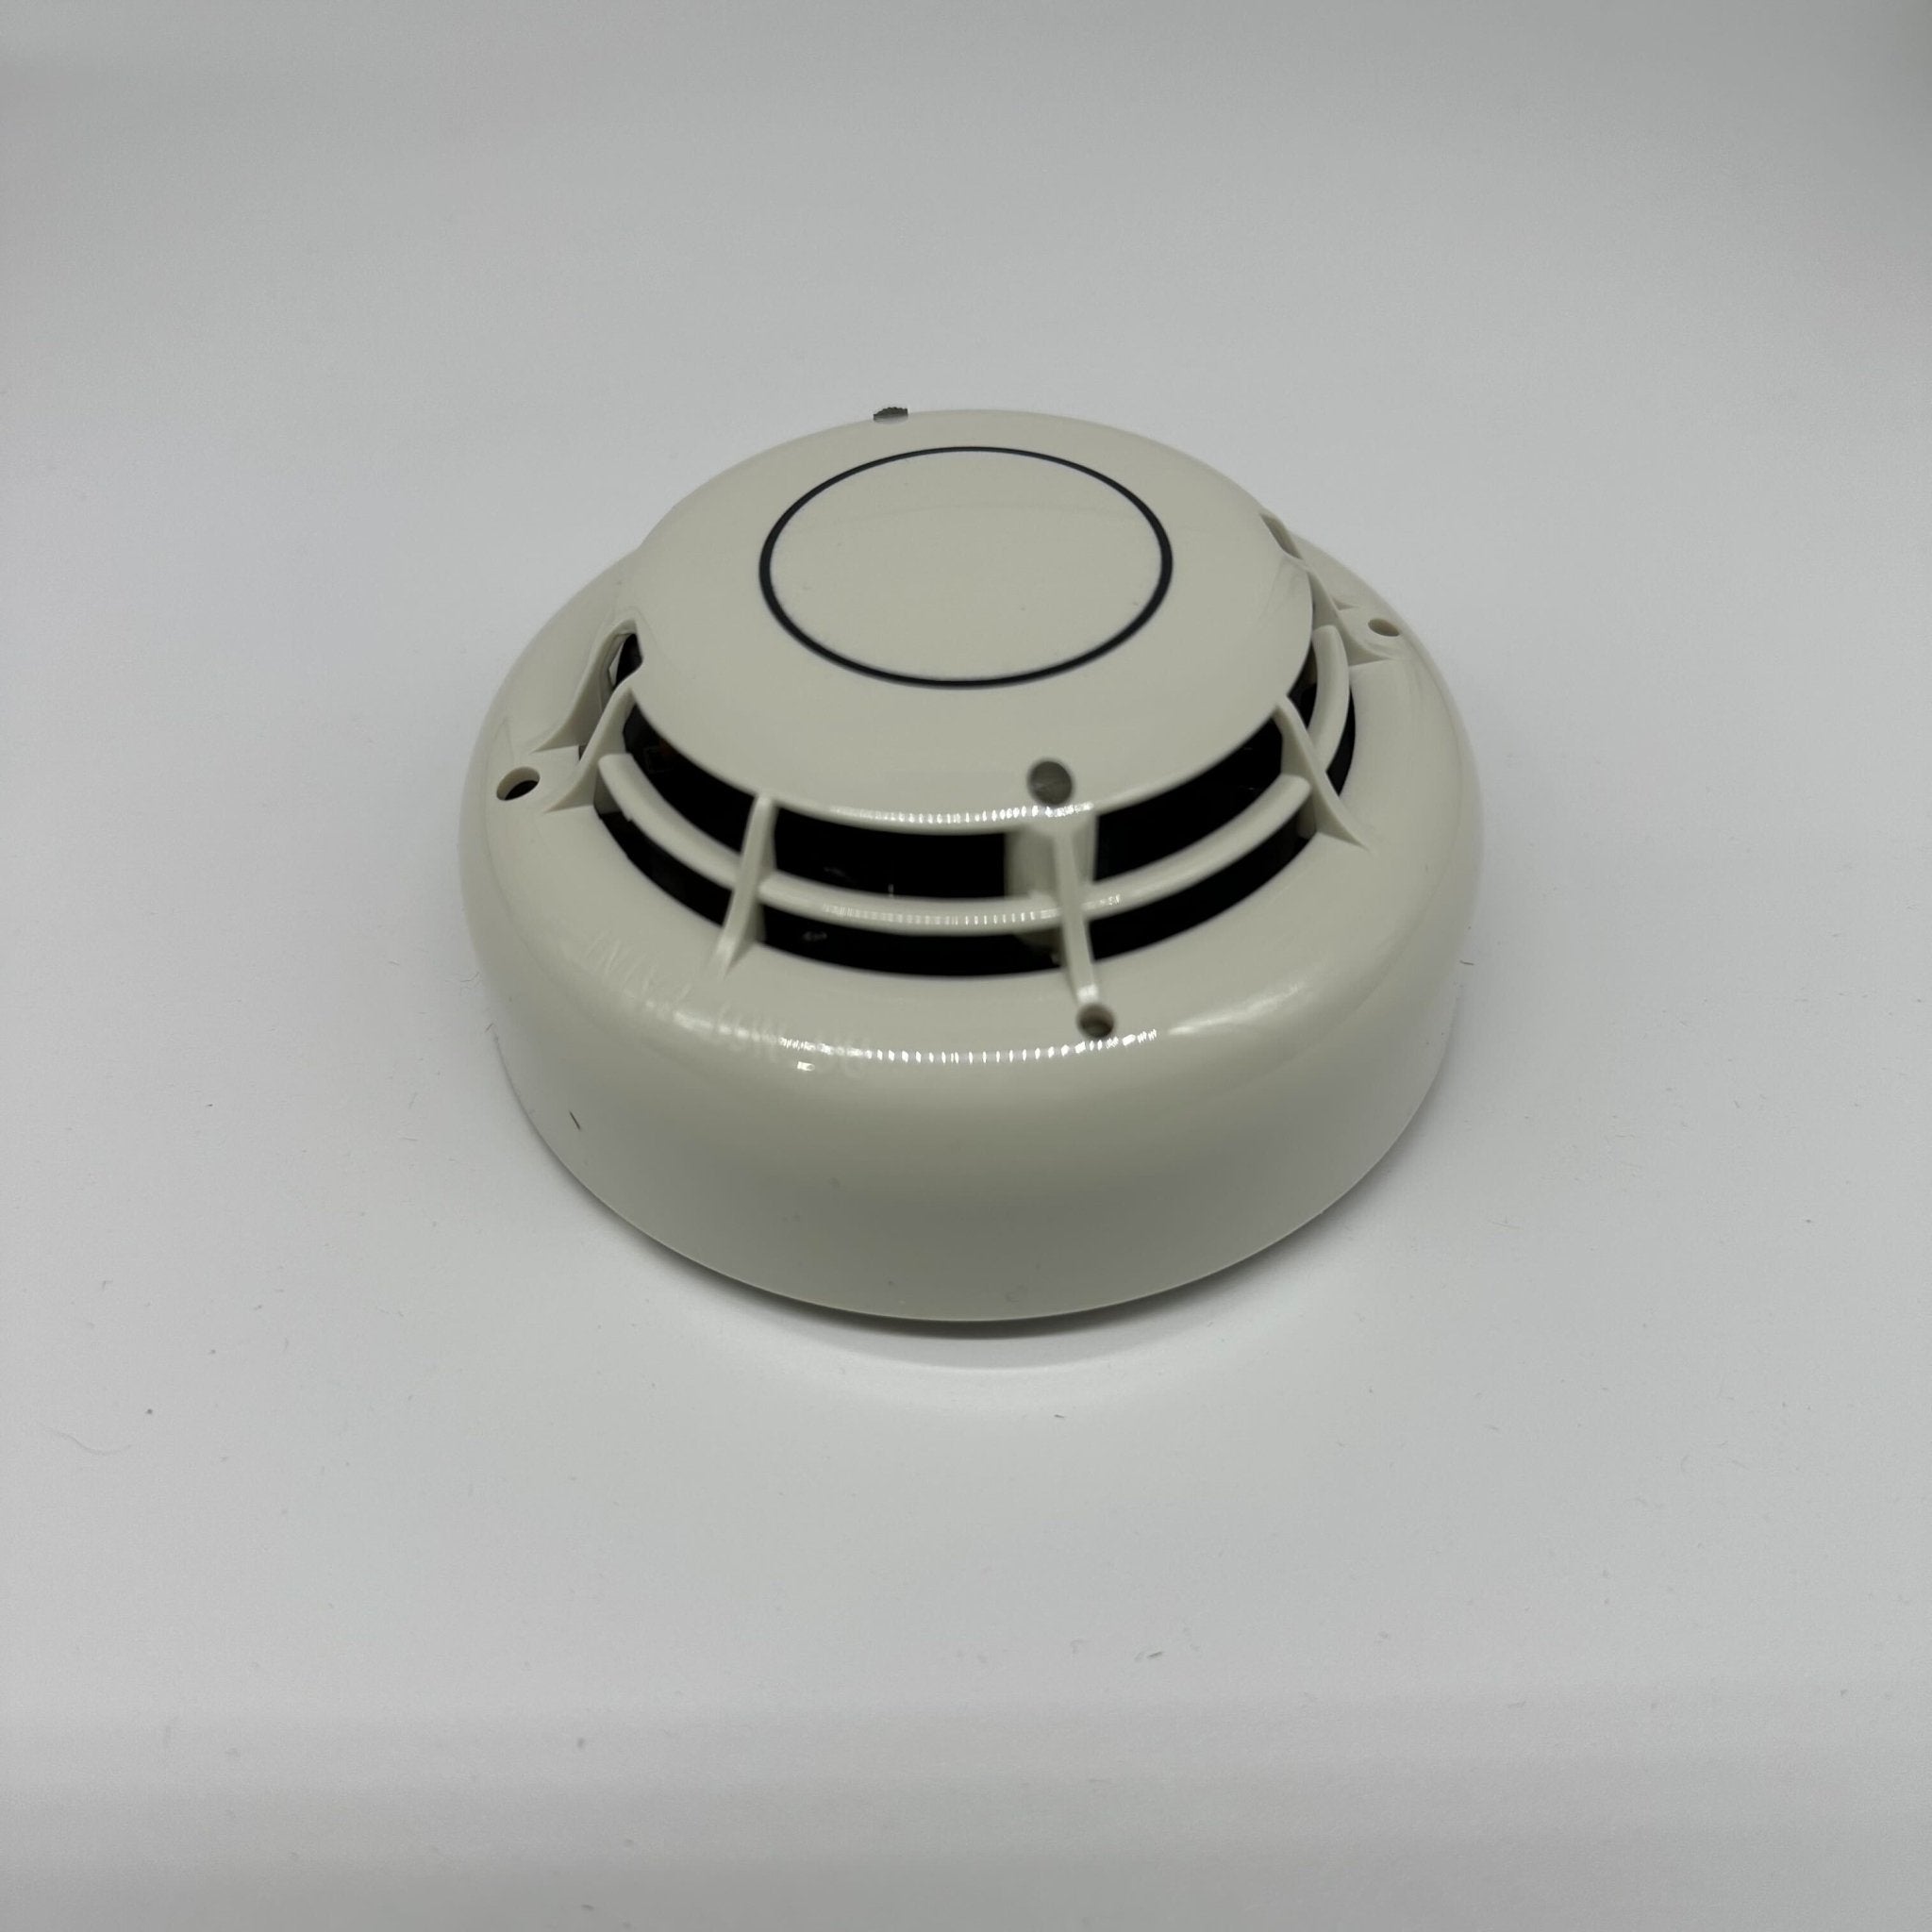 Silent Knight SD505-PHOTO - The Fire Alarm Supplier